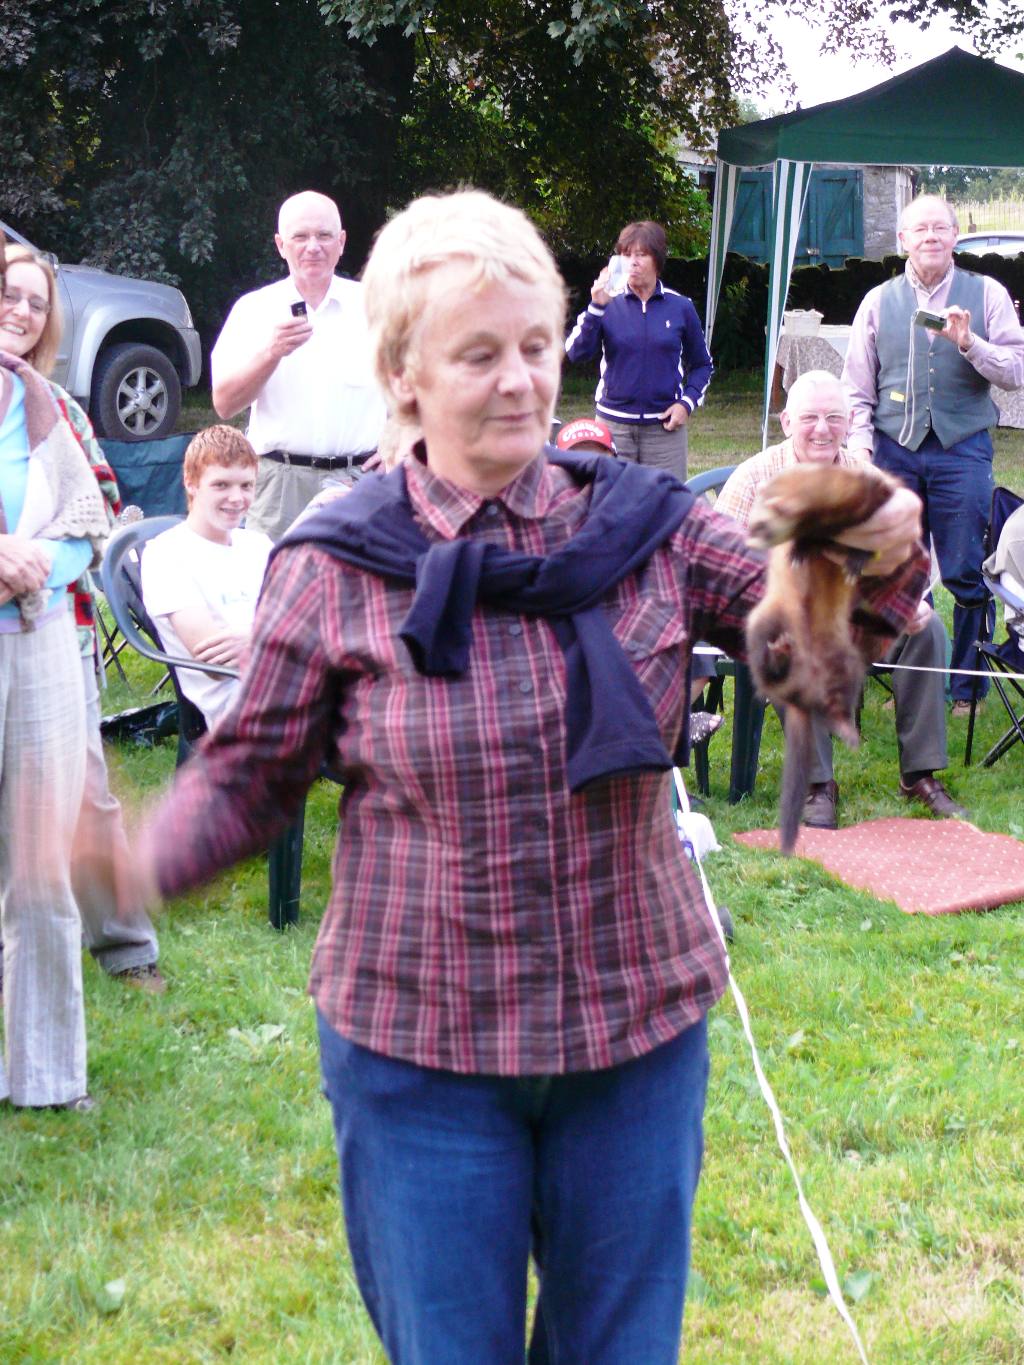 Fun & Frolics with Ferrets - At arms length they are!